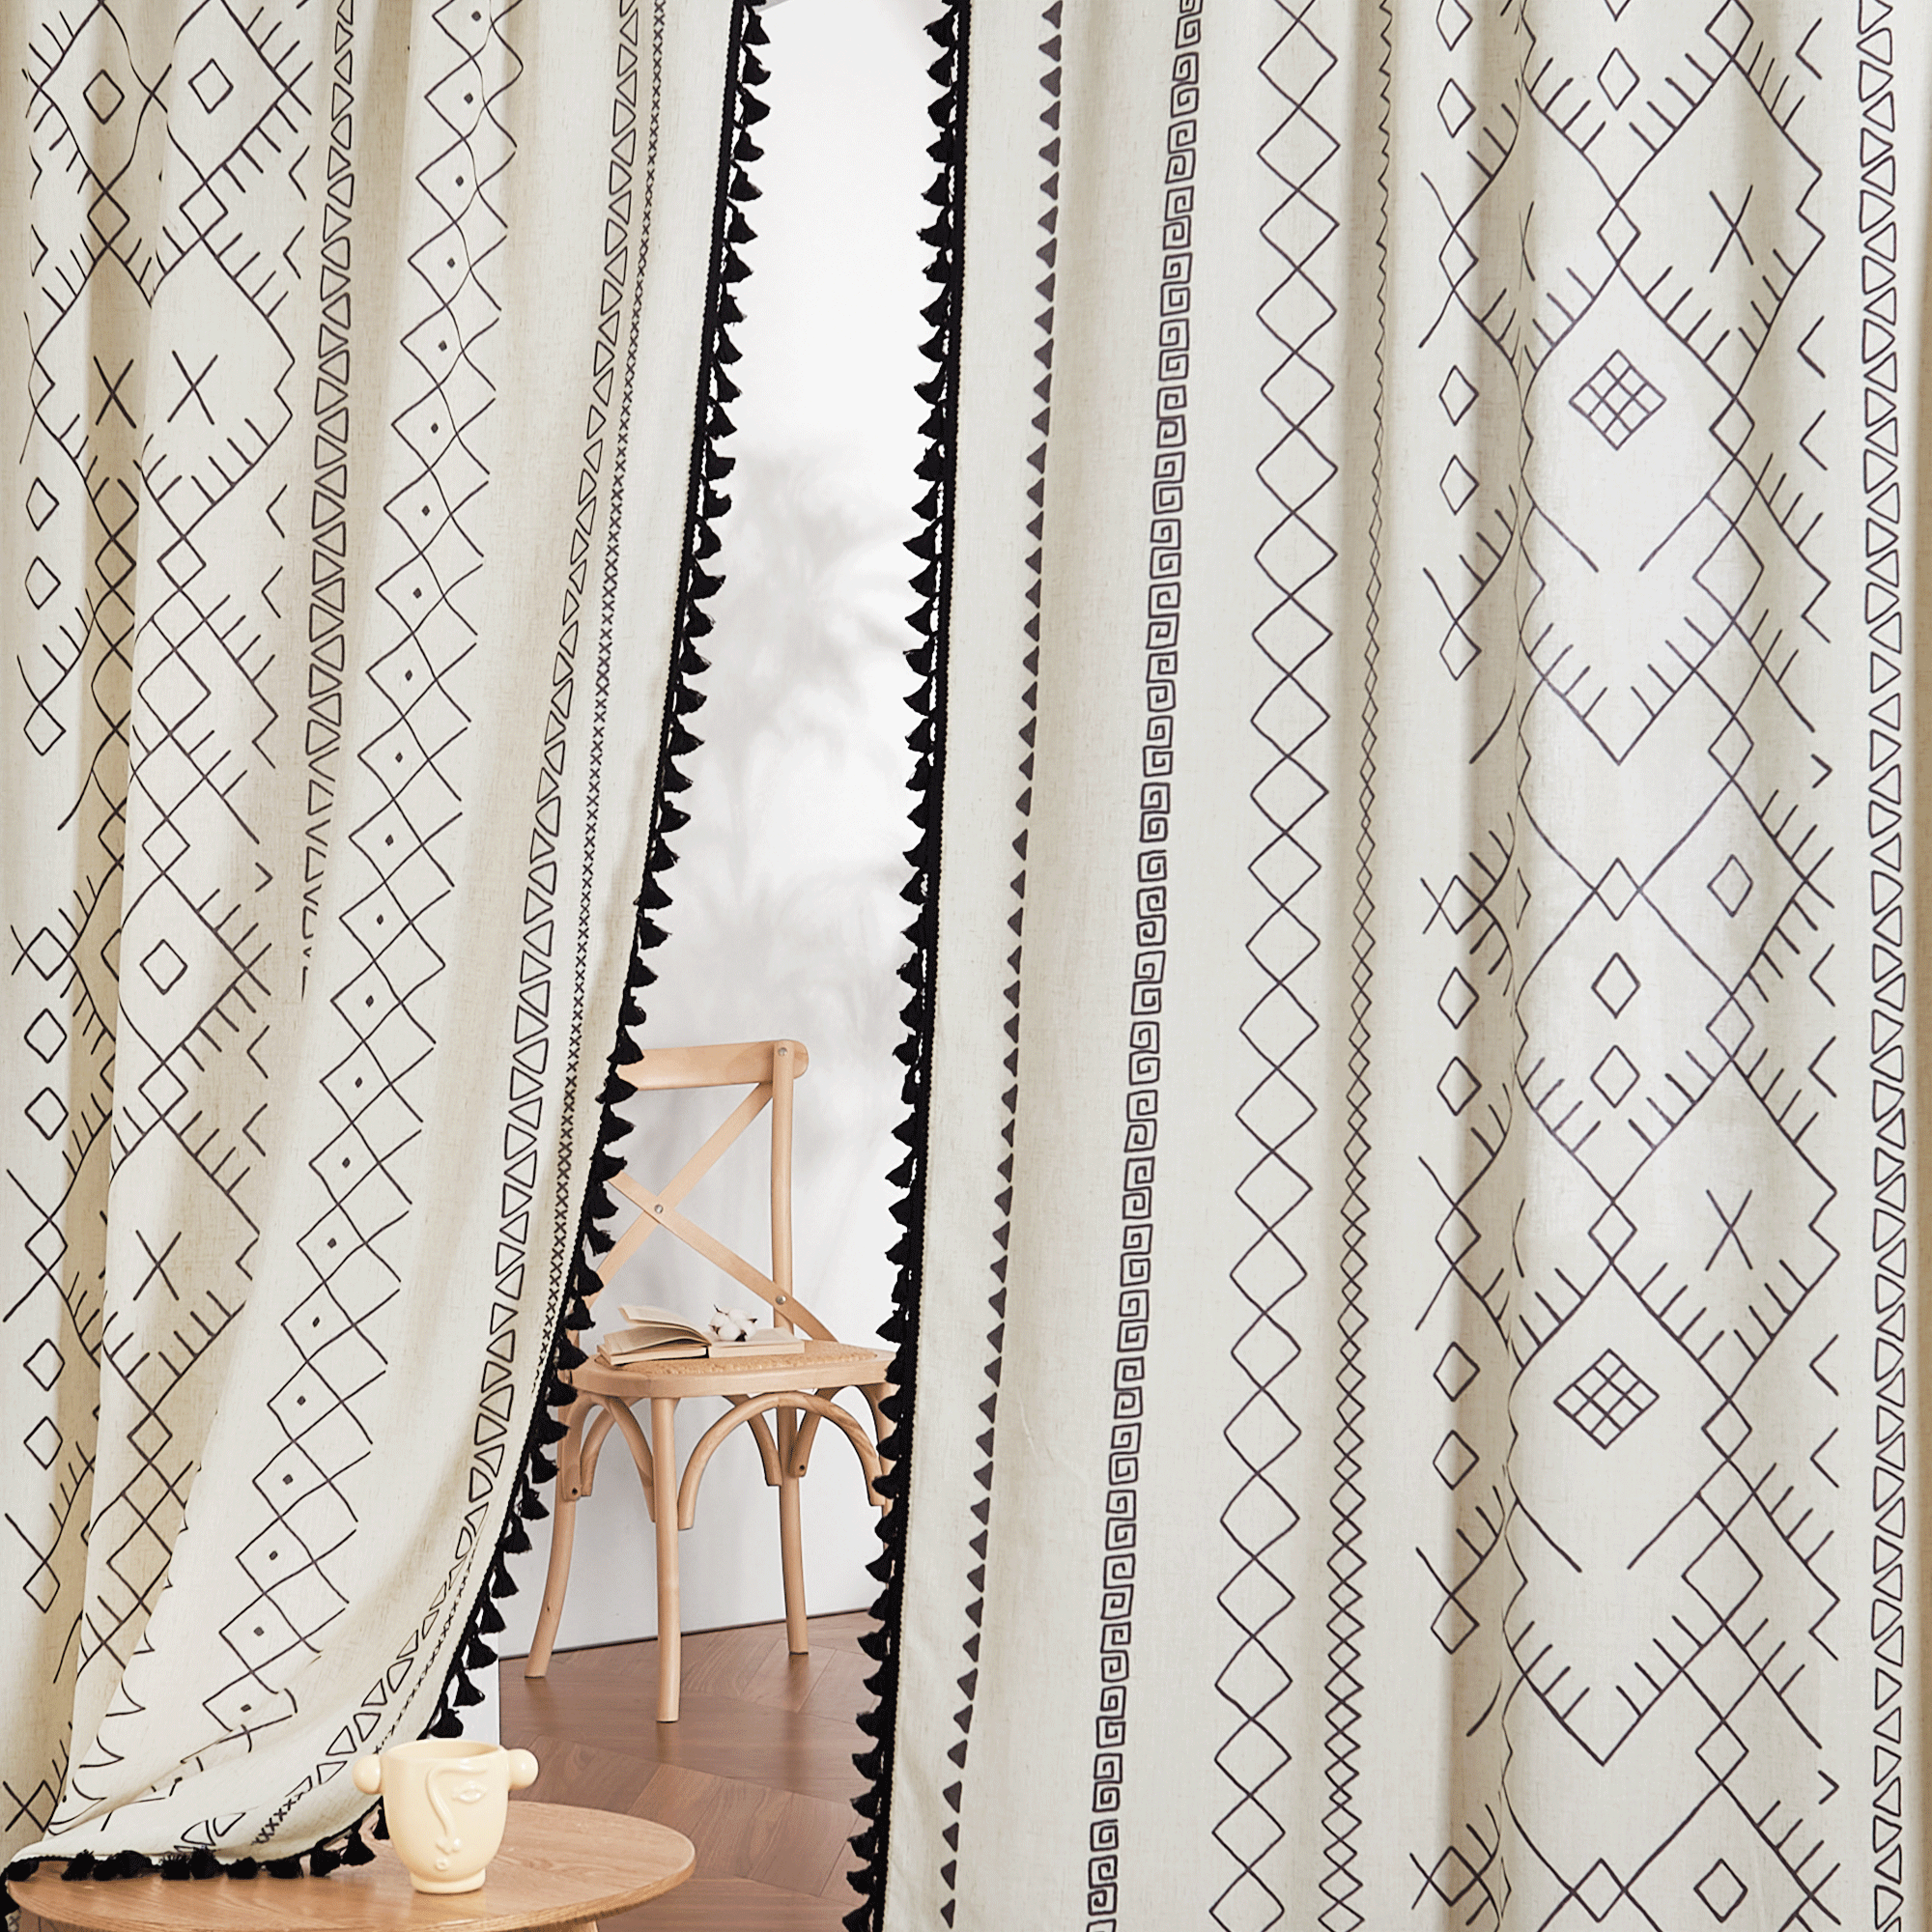 Rod Pocket Pattern Tassel Curtains Sheer Privacy Linen Curtains For Bedroom 2 Panels KGORGE Store